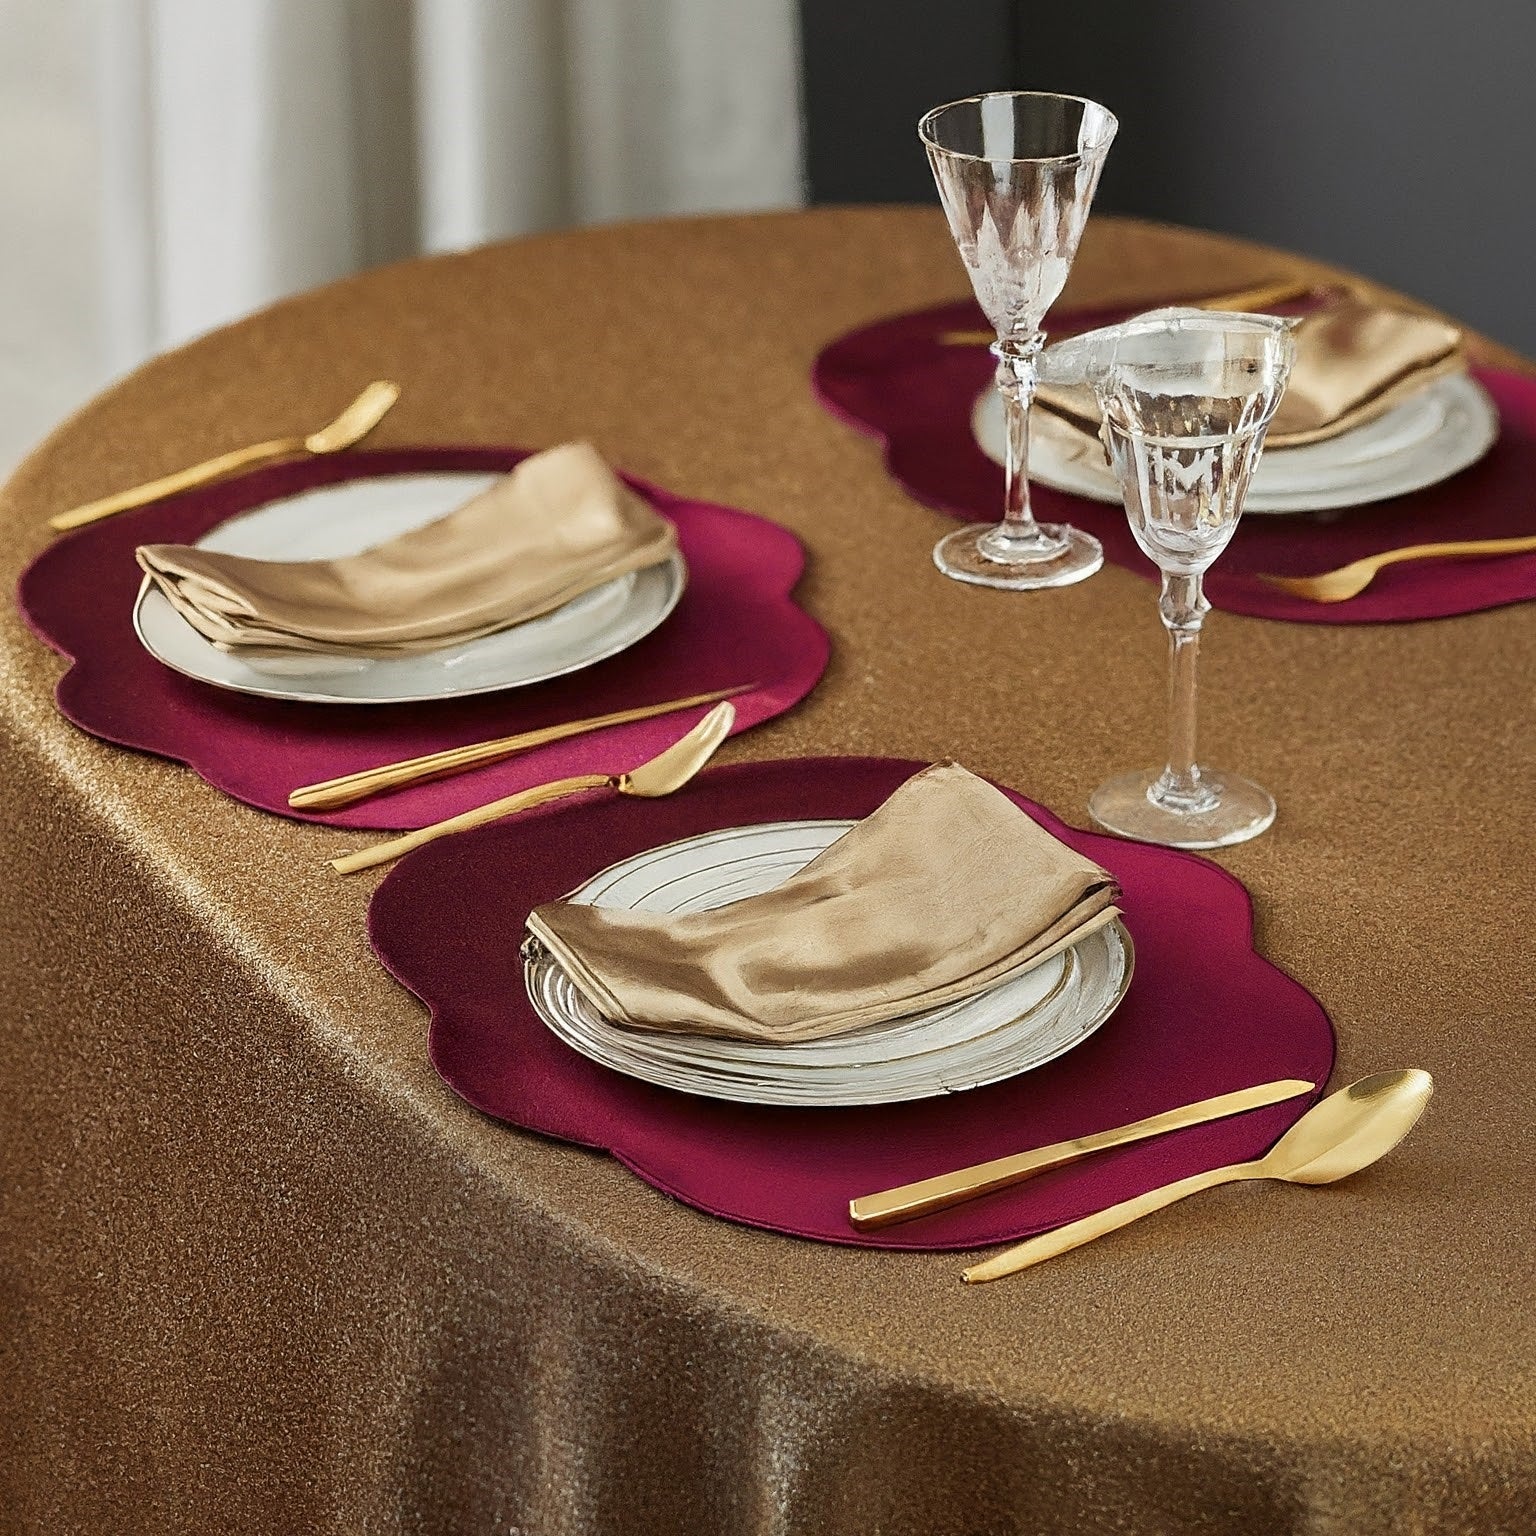 Elegant placemats with charger plates for a formal dinner setting.